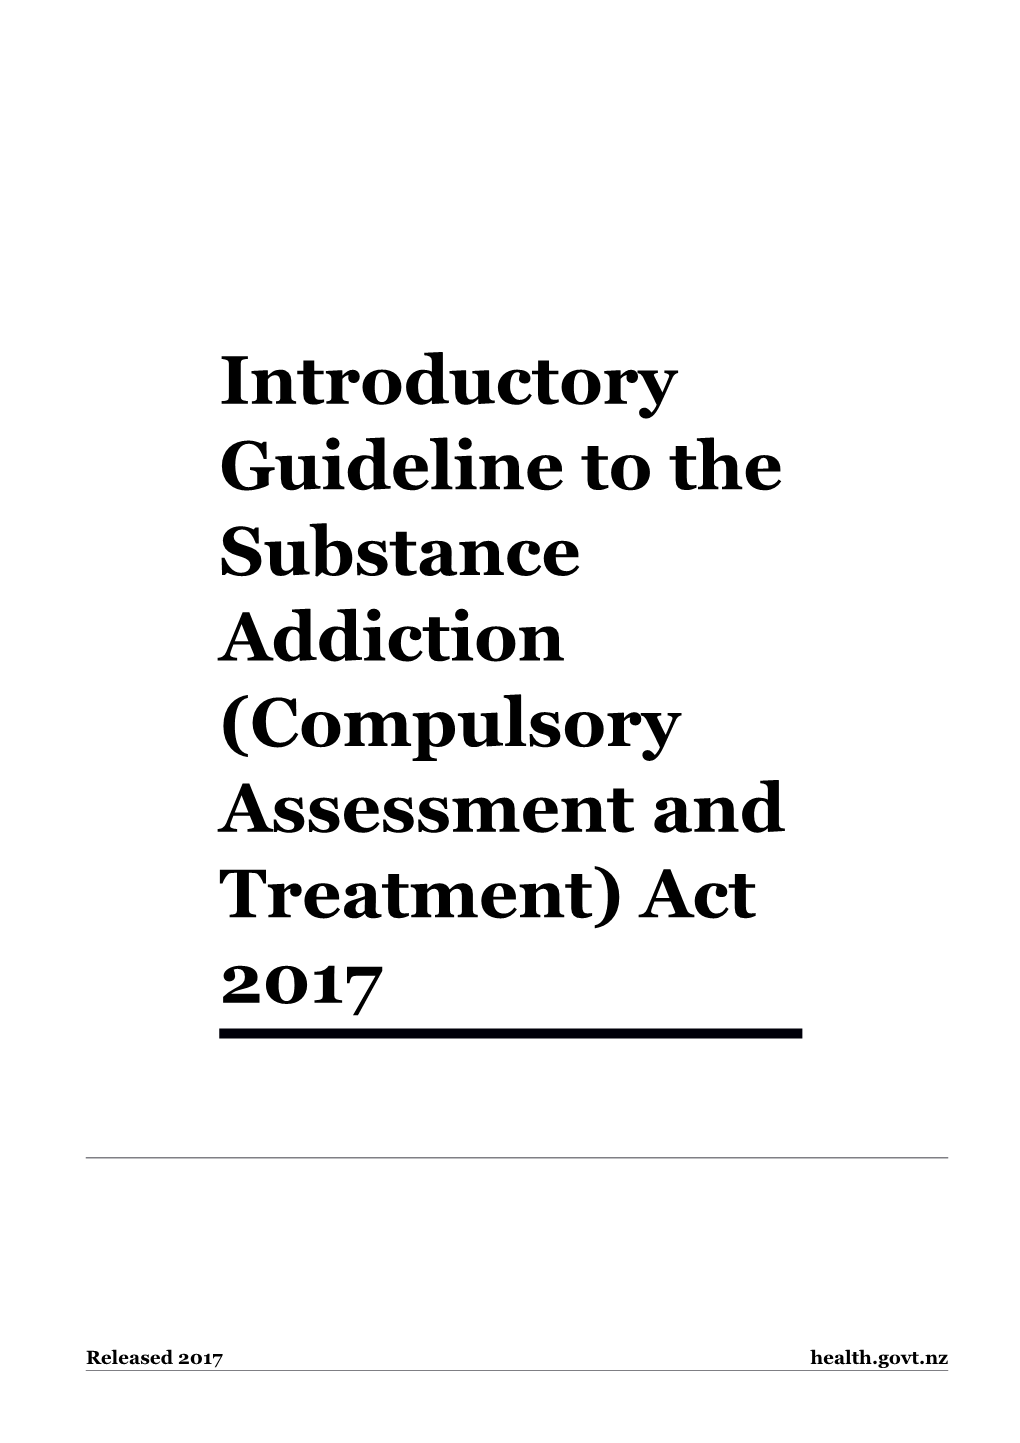 Introductory Guideline to the Substance Addiction (Compulsory Assessment and Treatment) Act 2017